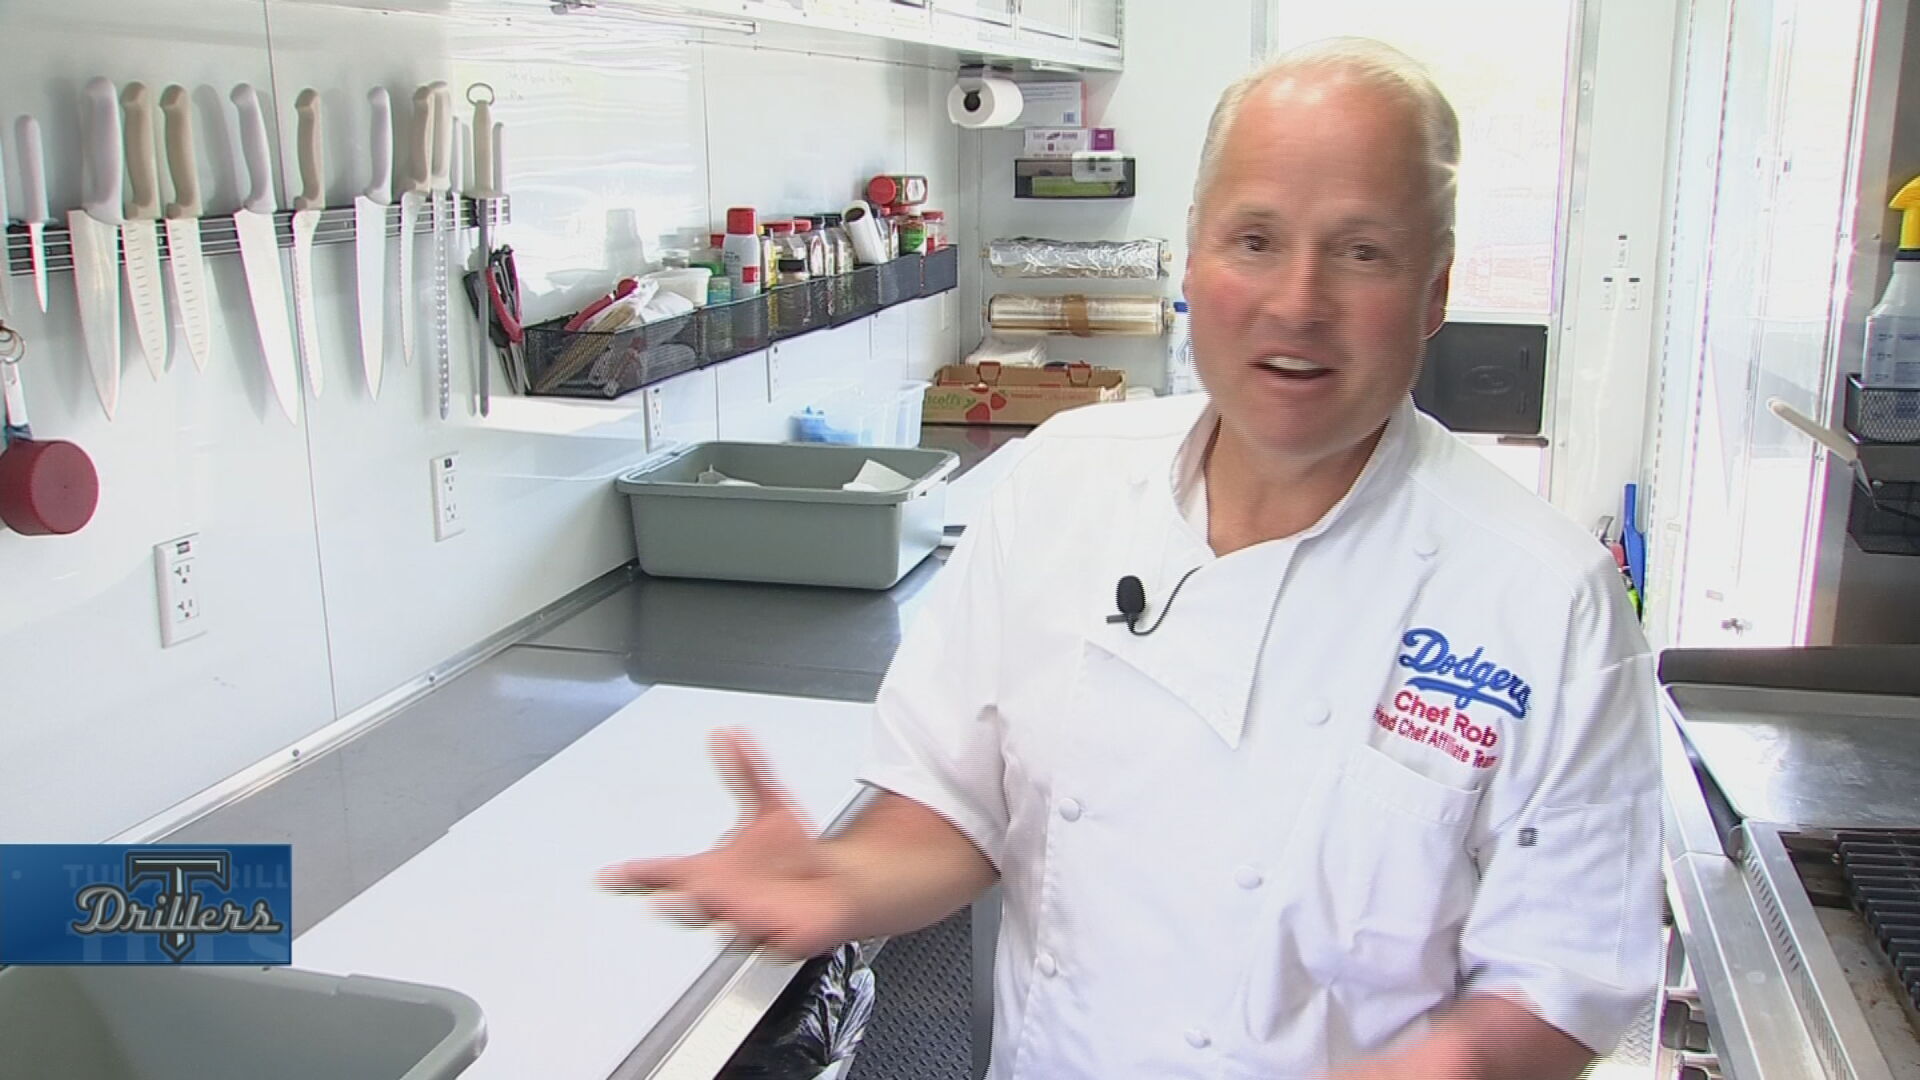 Tulsa Drillers’ Team Chef Helps Cook Up Recipe For Success